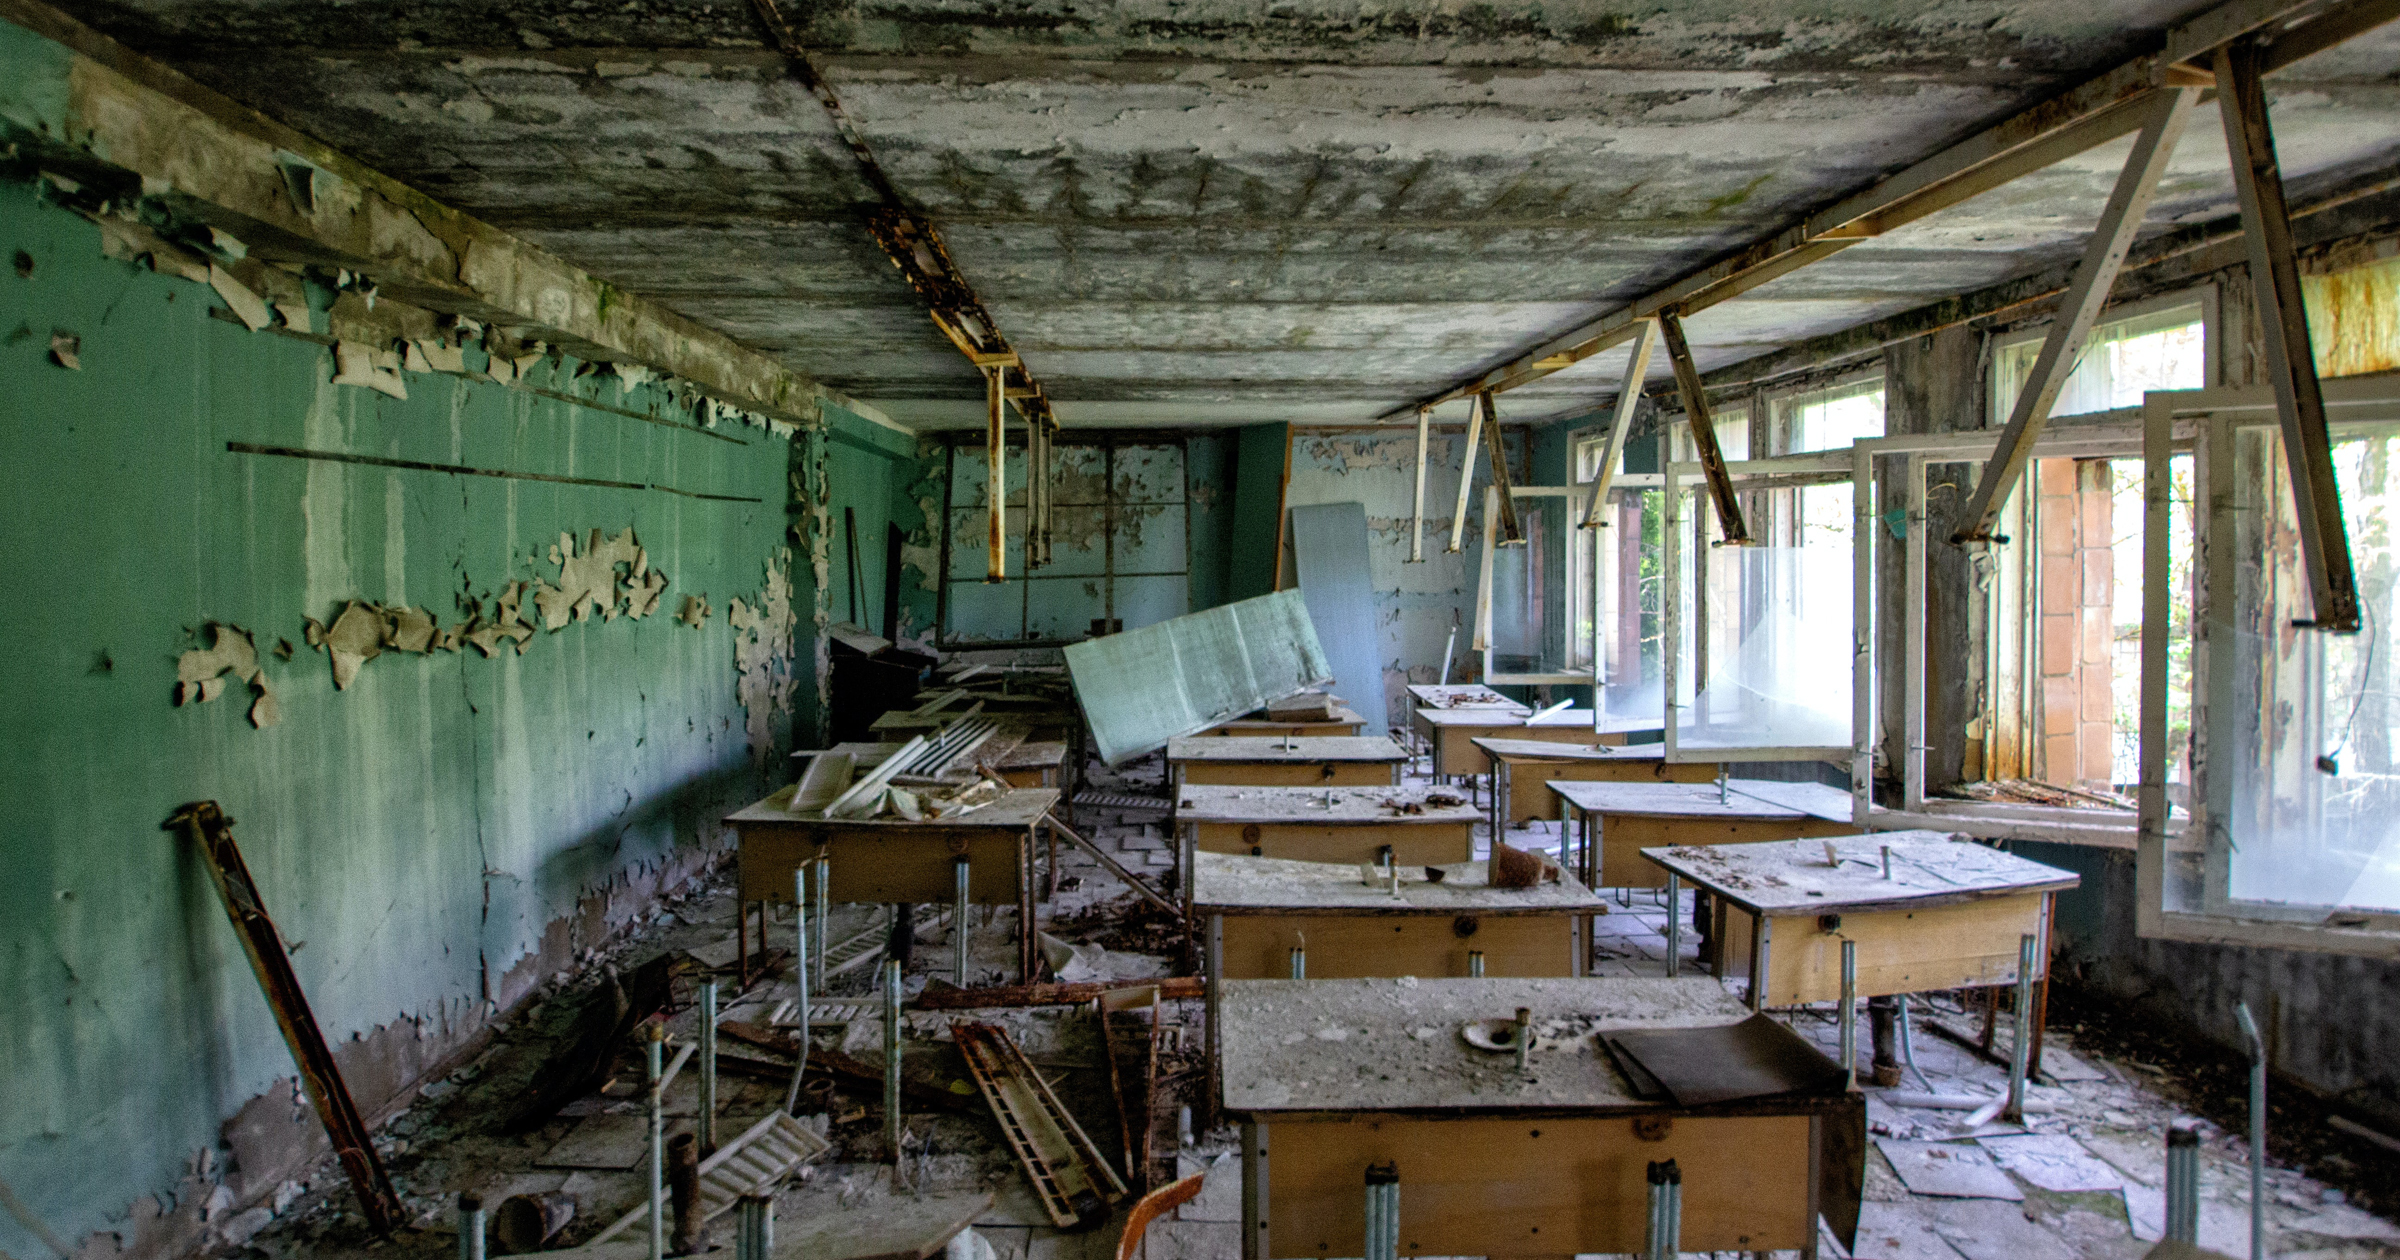 A photo of a wrecked classroom with paint peeling from the ceiling, desks turned over and broken.